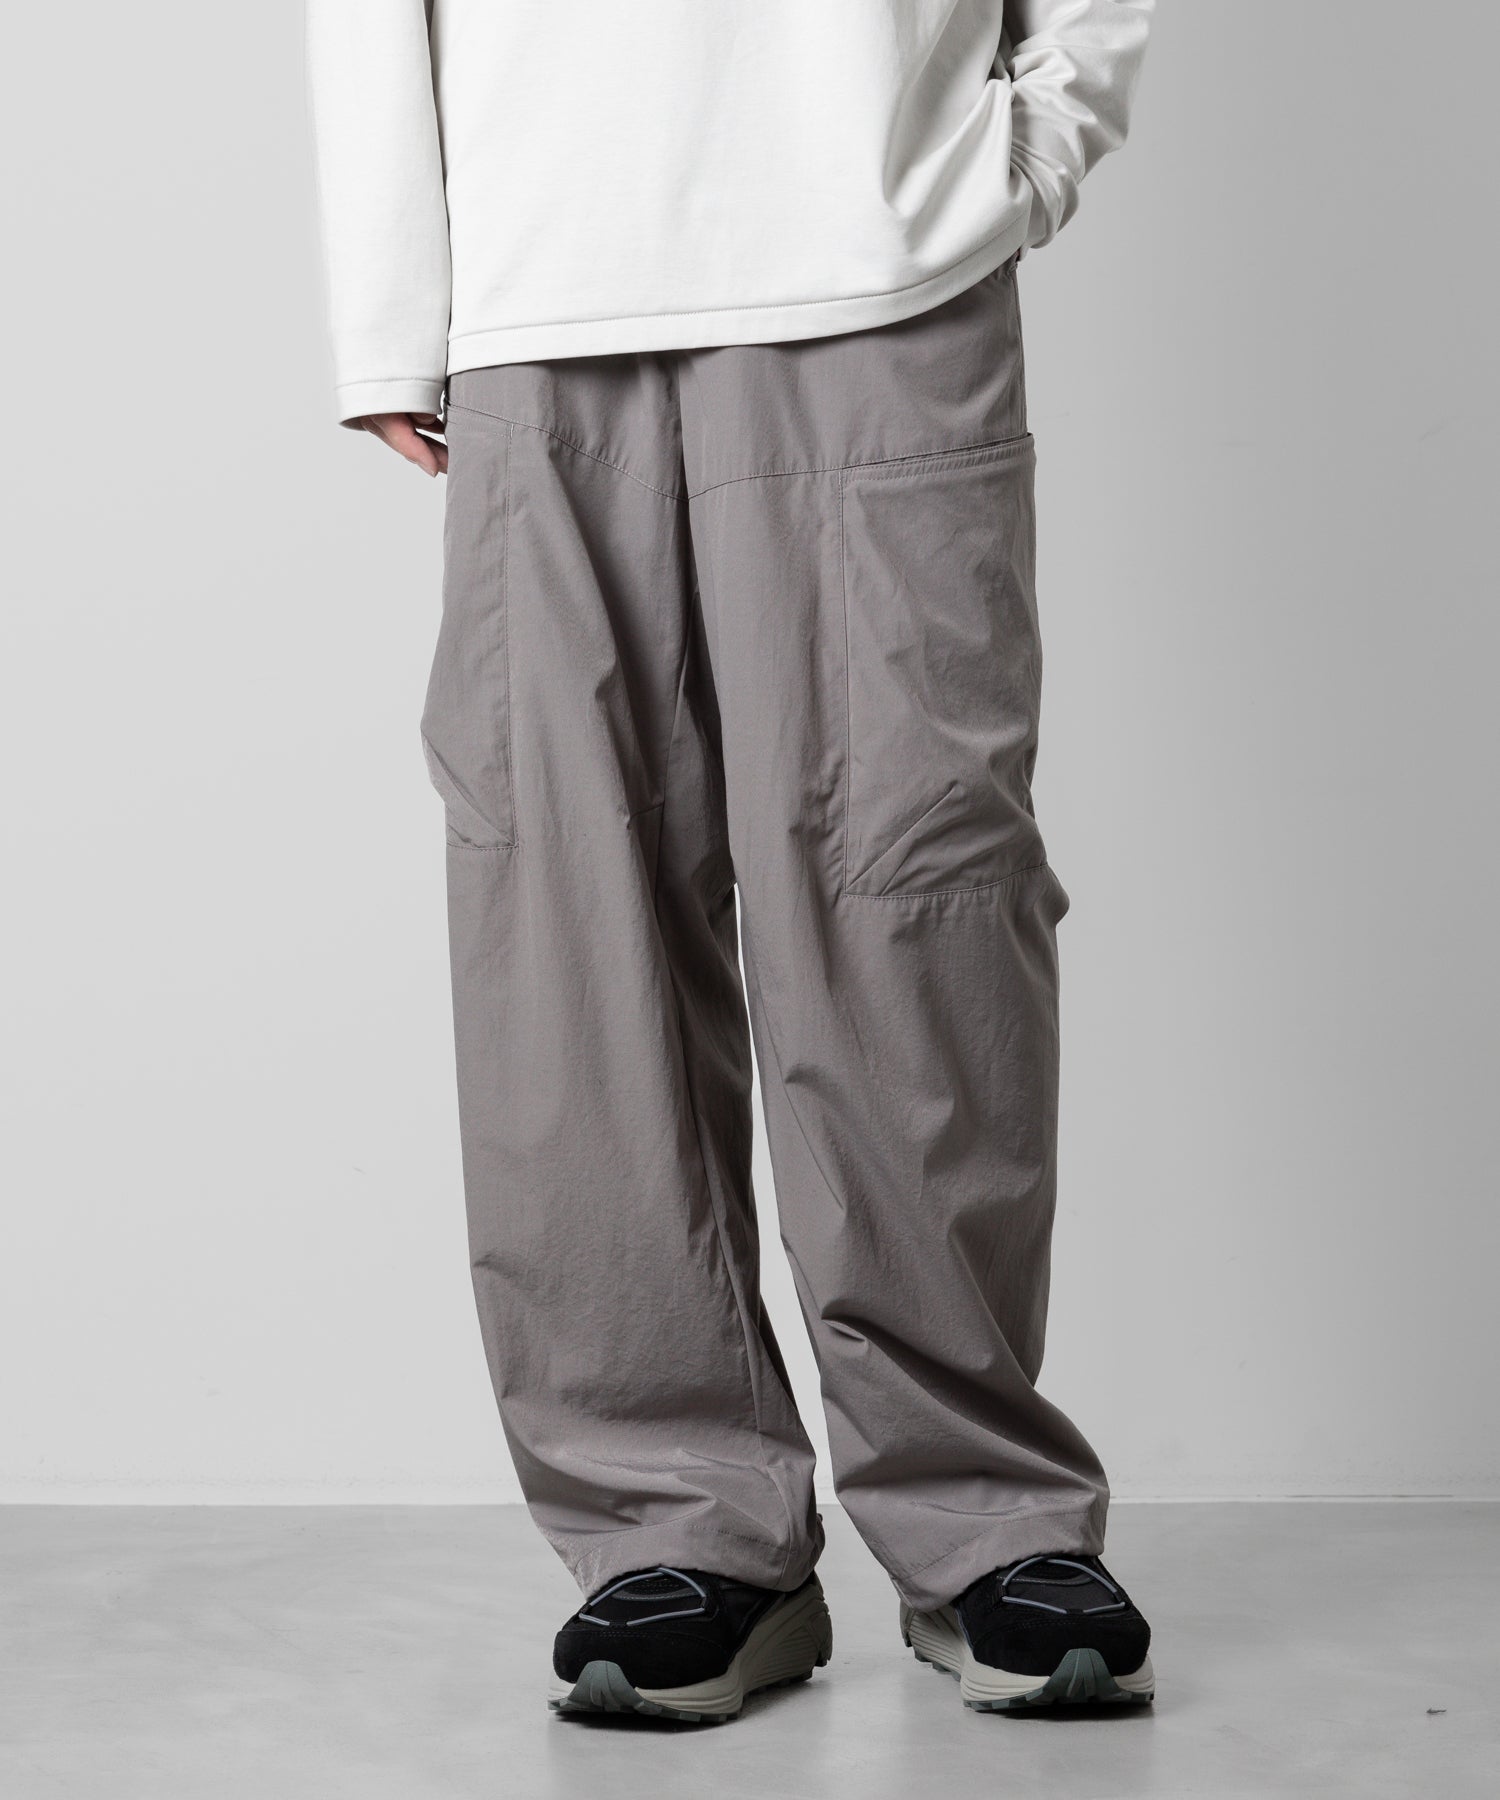 【ATTACHMENT】ATTACHMENT アタッチメントのCO/NY WEATHER CLOTH WIDE CARGO TROUSERS - KHAKI GRAY  公式通販サイトsession福岡セレクトショップ